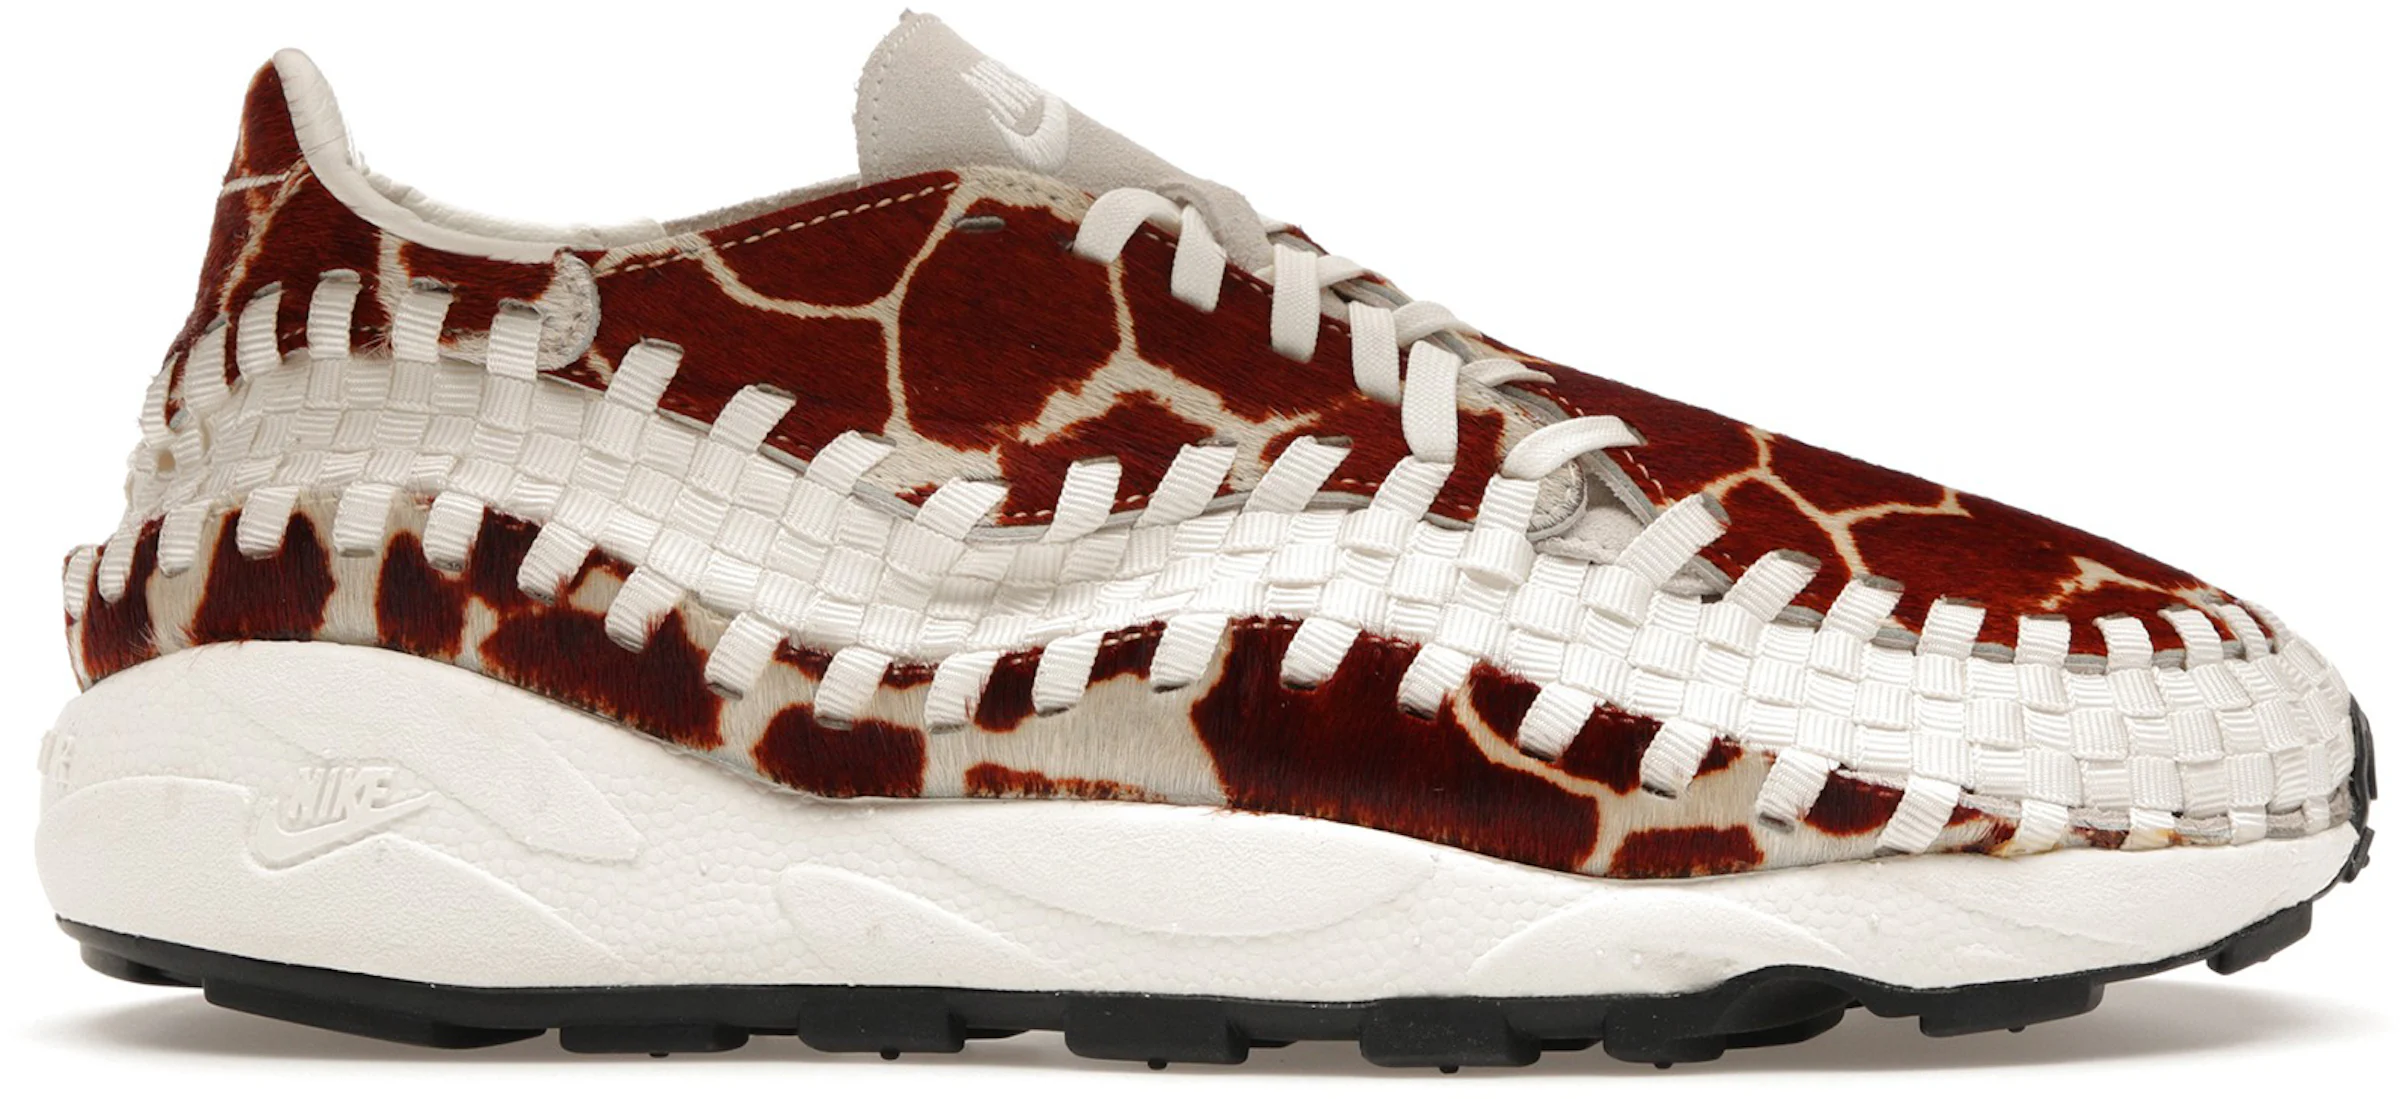 https://images.stockx.com/images/Nike-Air-Footscape-Woven-Cow-Print-Womens-Product.jpg?fit=fill&bg=FFFFFF&w=1200&h=857&fm=webp&auto=compress&dpr=2&trim=color&updated_at=1694532814&q=60